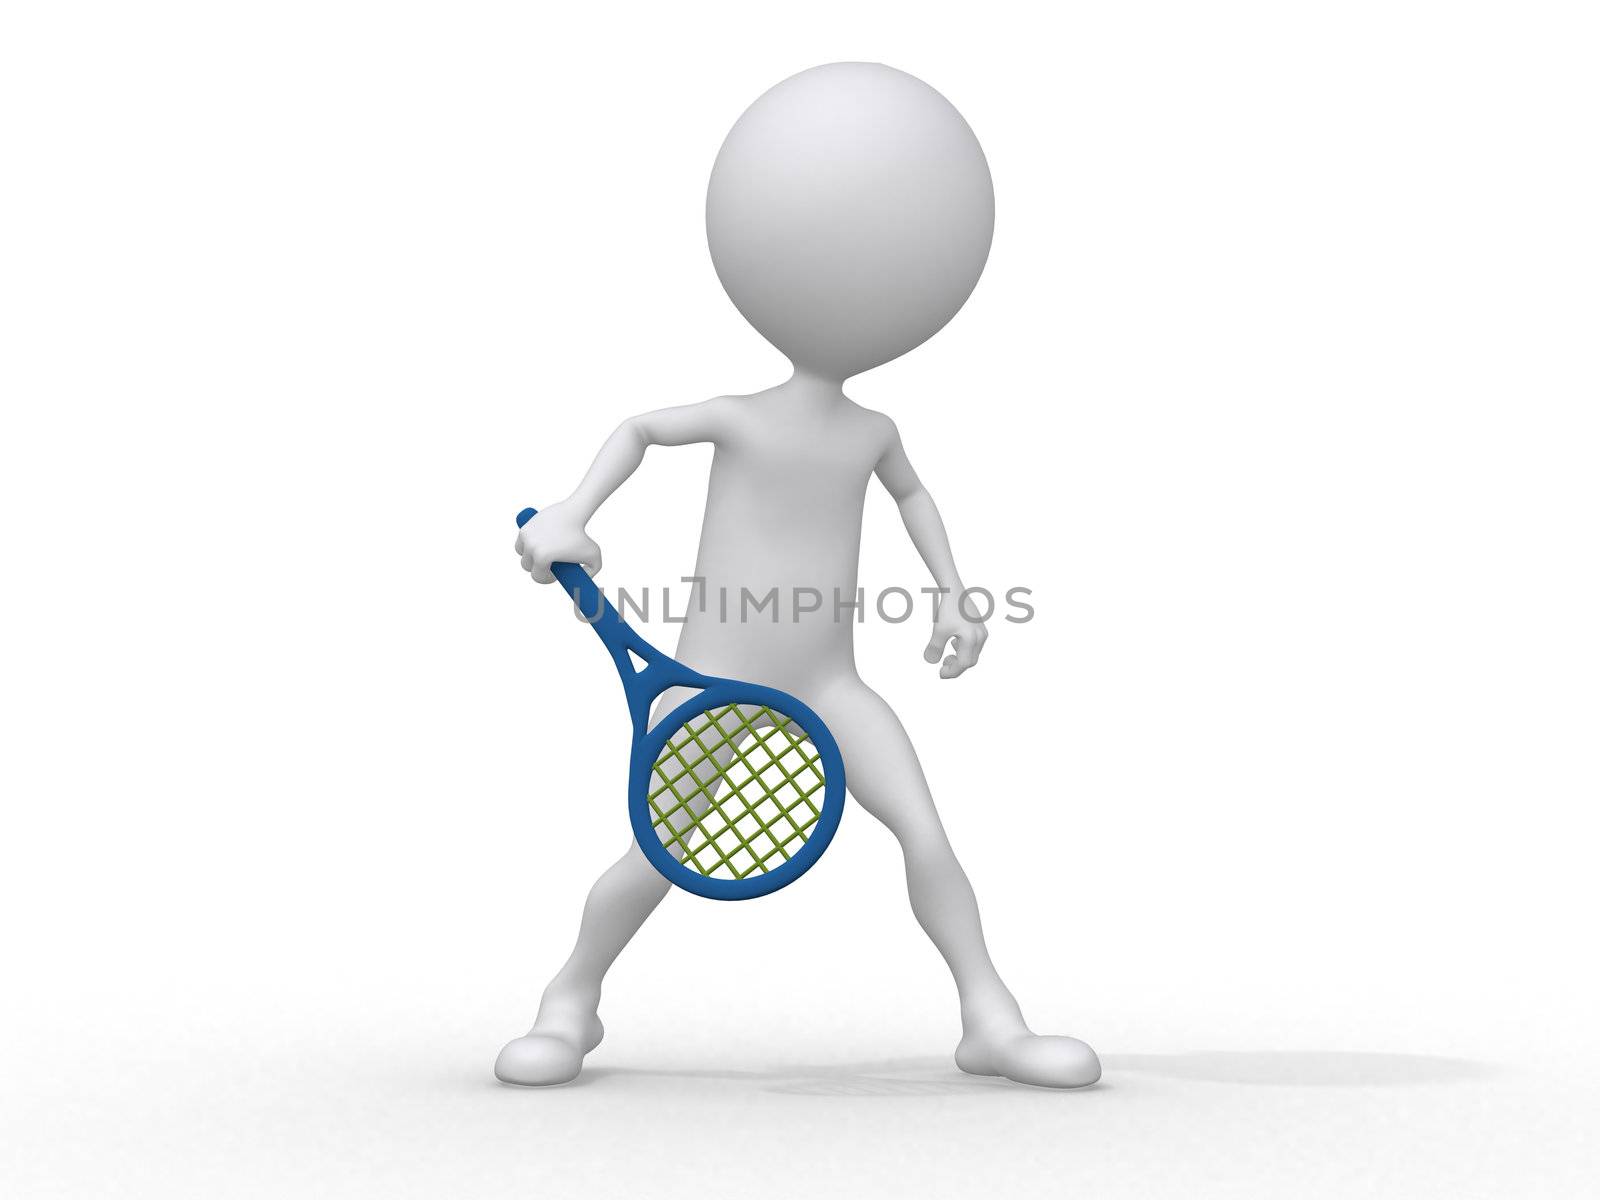 3d abstract human playing tennis